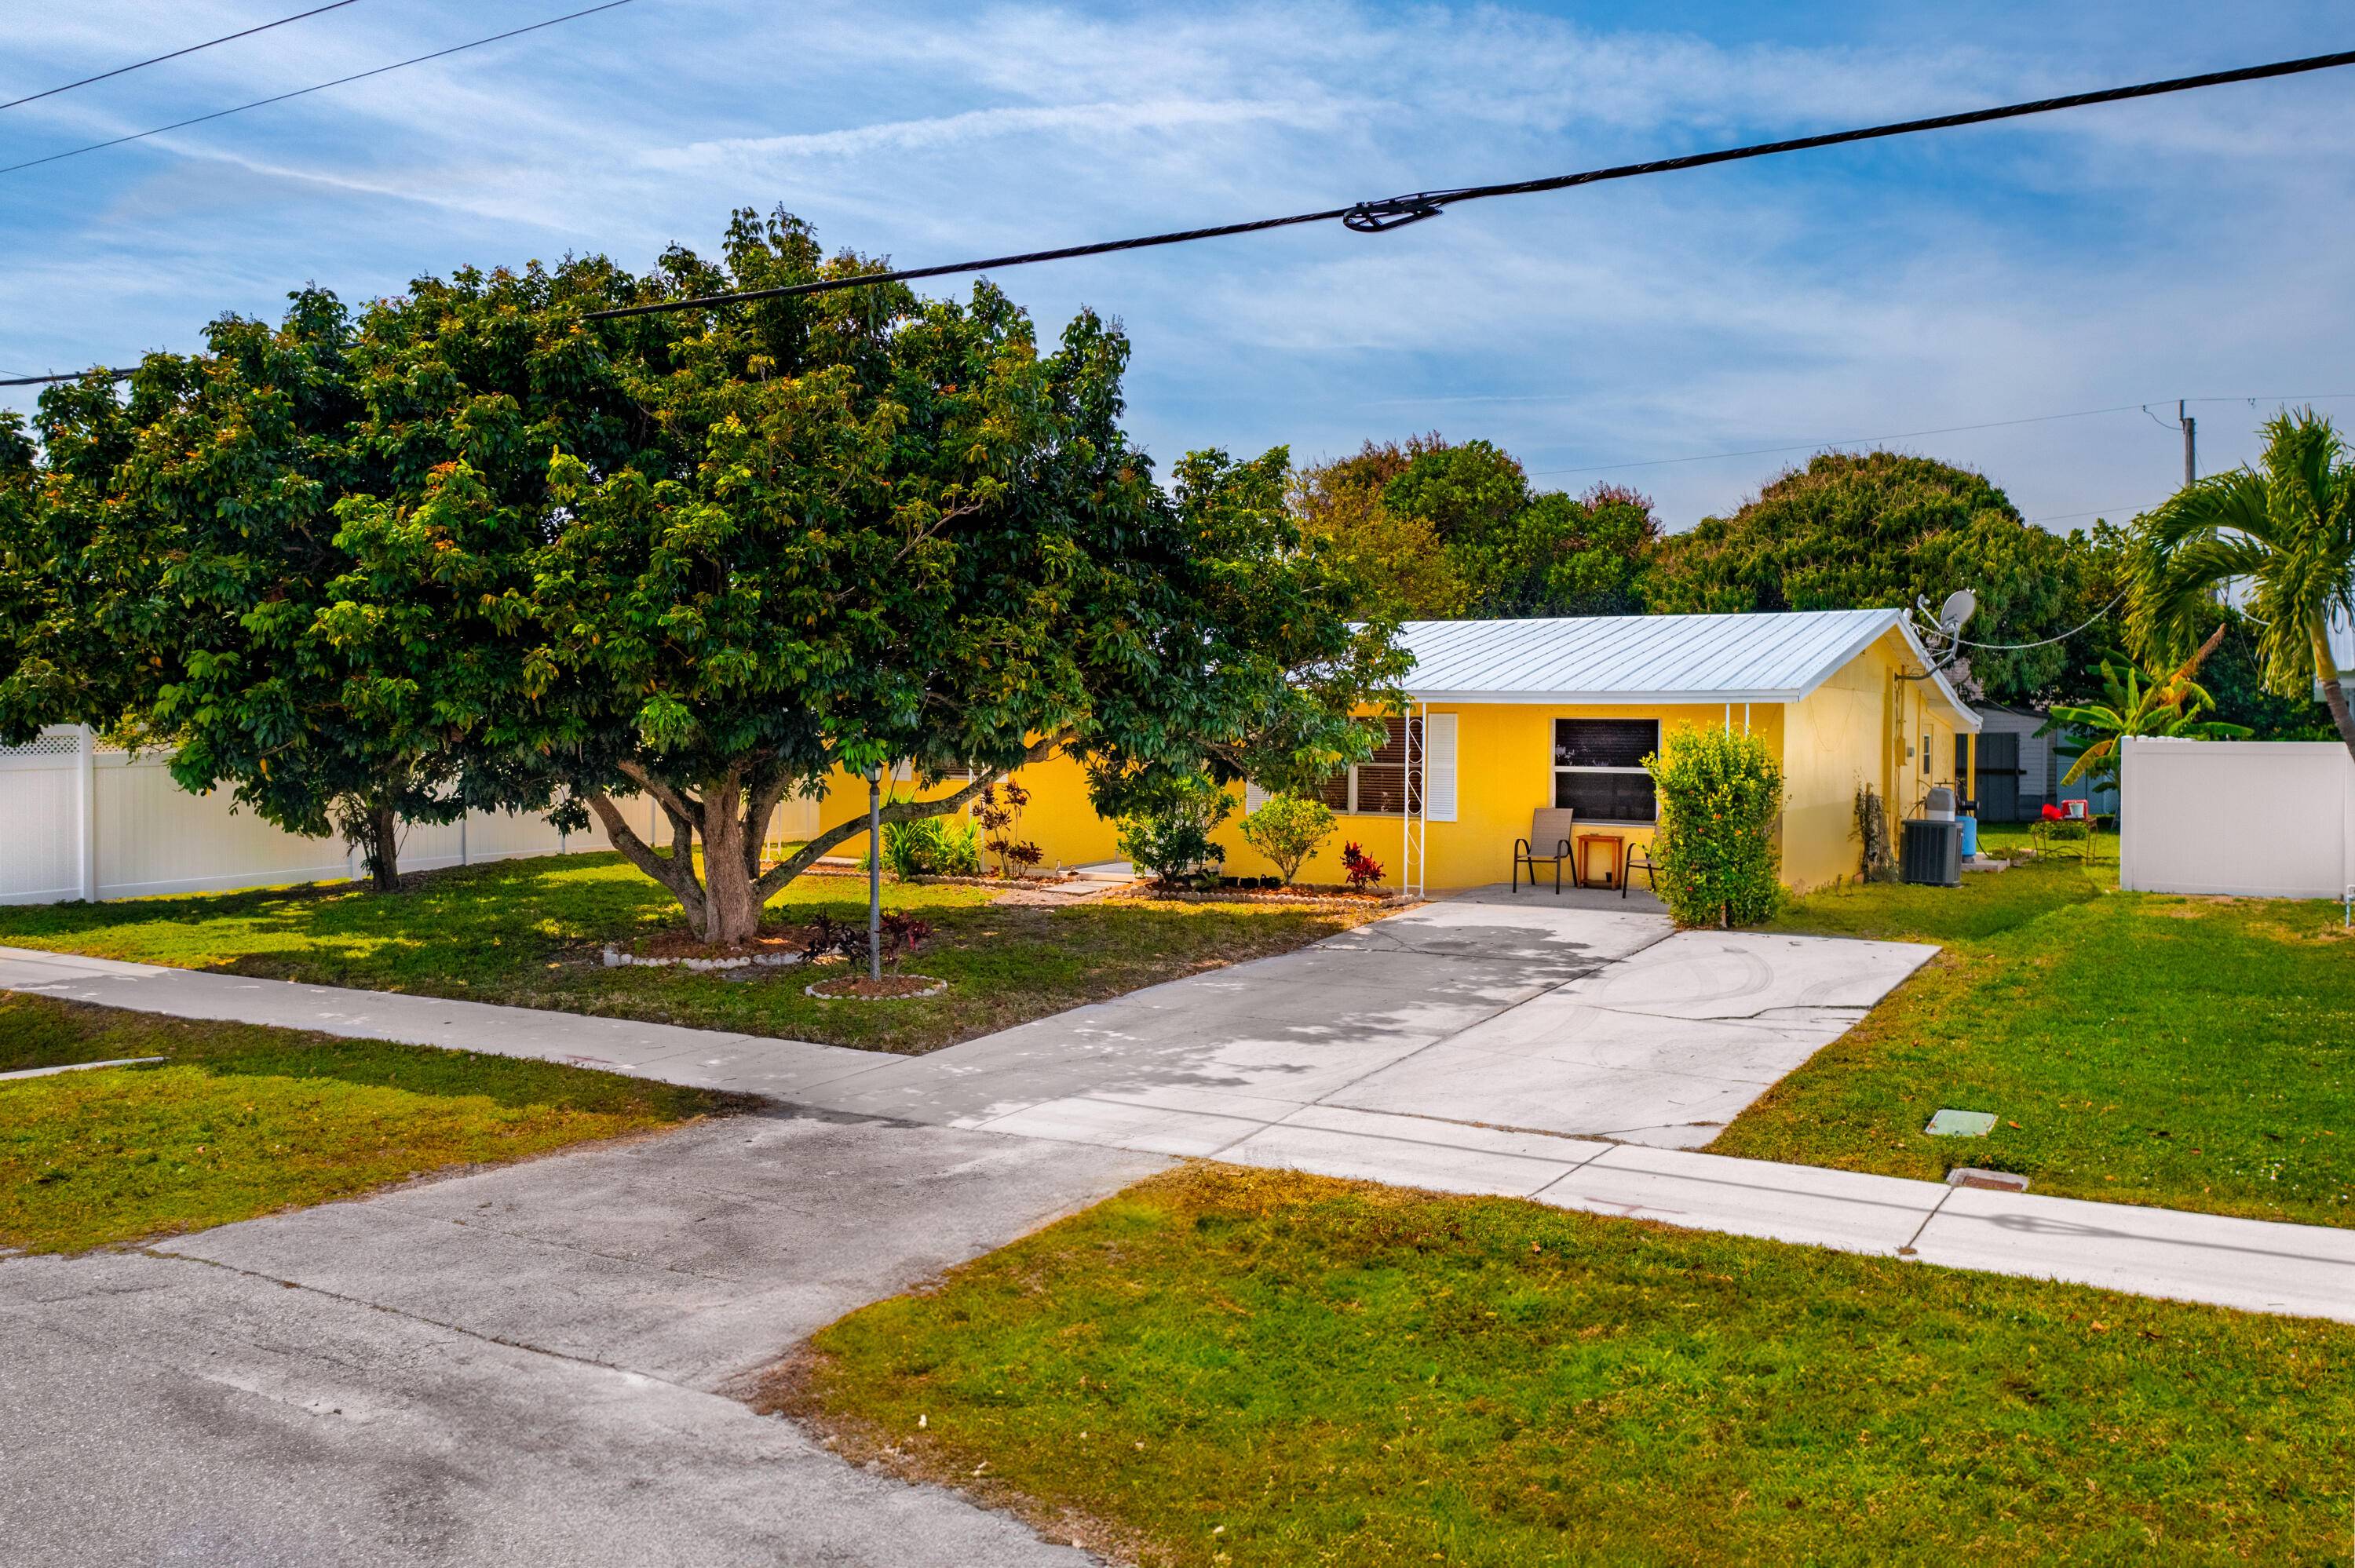 Discover convenience and tranquility in this 3 bed, 2 bath home just moments from shopping, dining, beaches and schools such as Jensen beach high school and Jensen beach elementary.